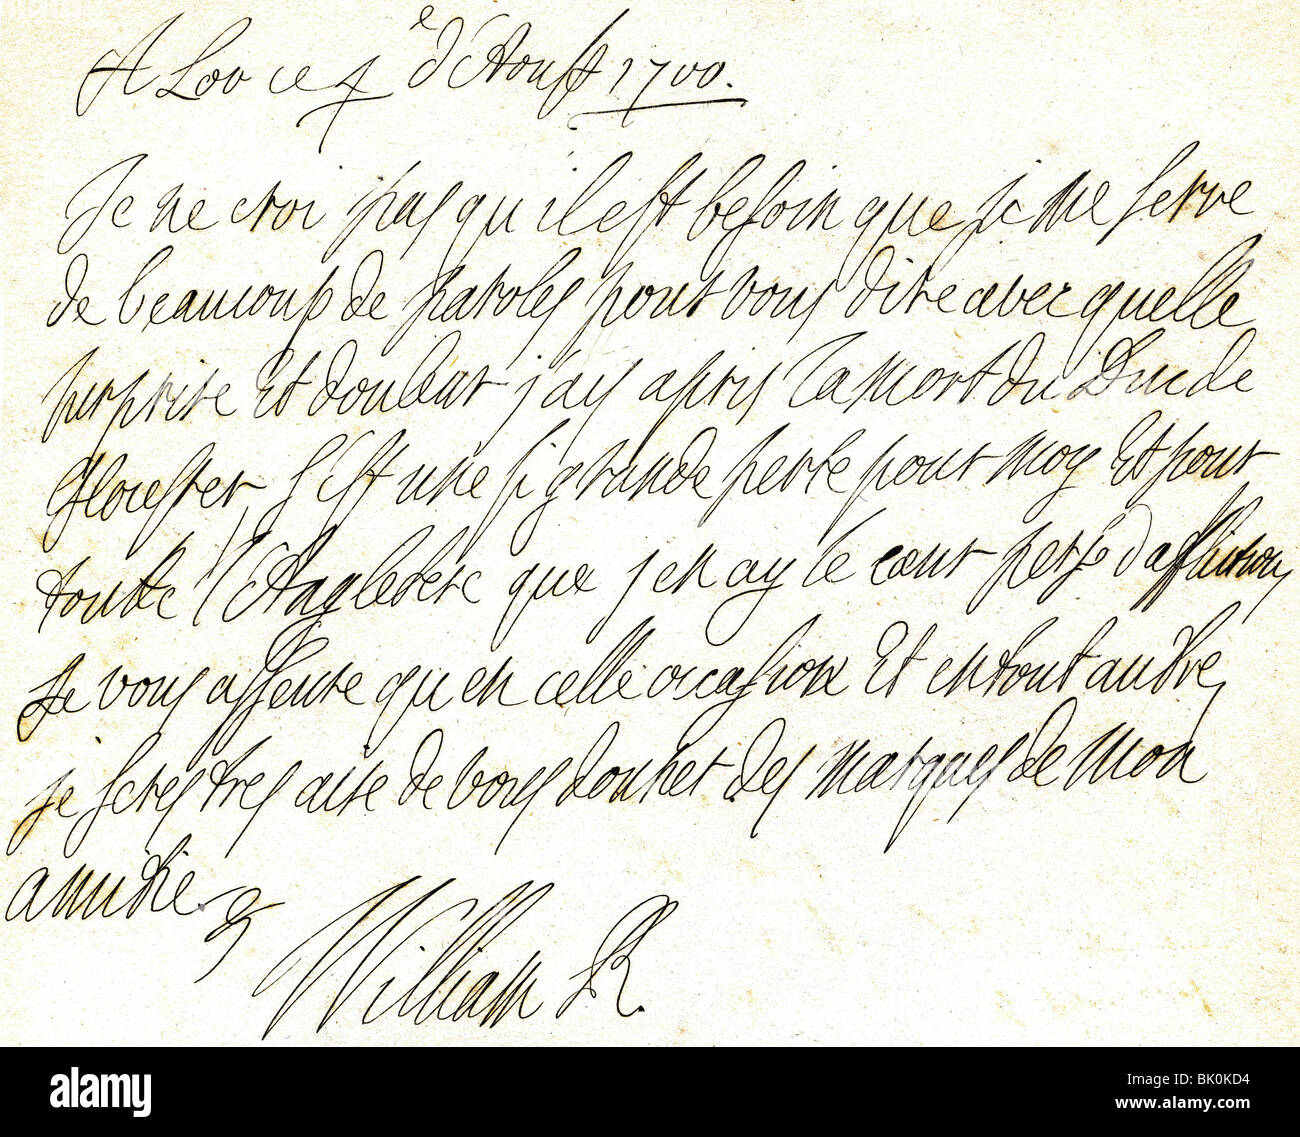 William III, 14.11.1650 - 19.3.1702, King of England, Scotland and Ireland 1689 - 1702, his autograph, letter to the Earl of Marlborough, in French, August 1700, Stock Photo